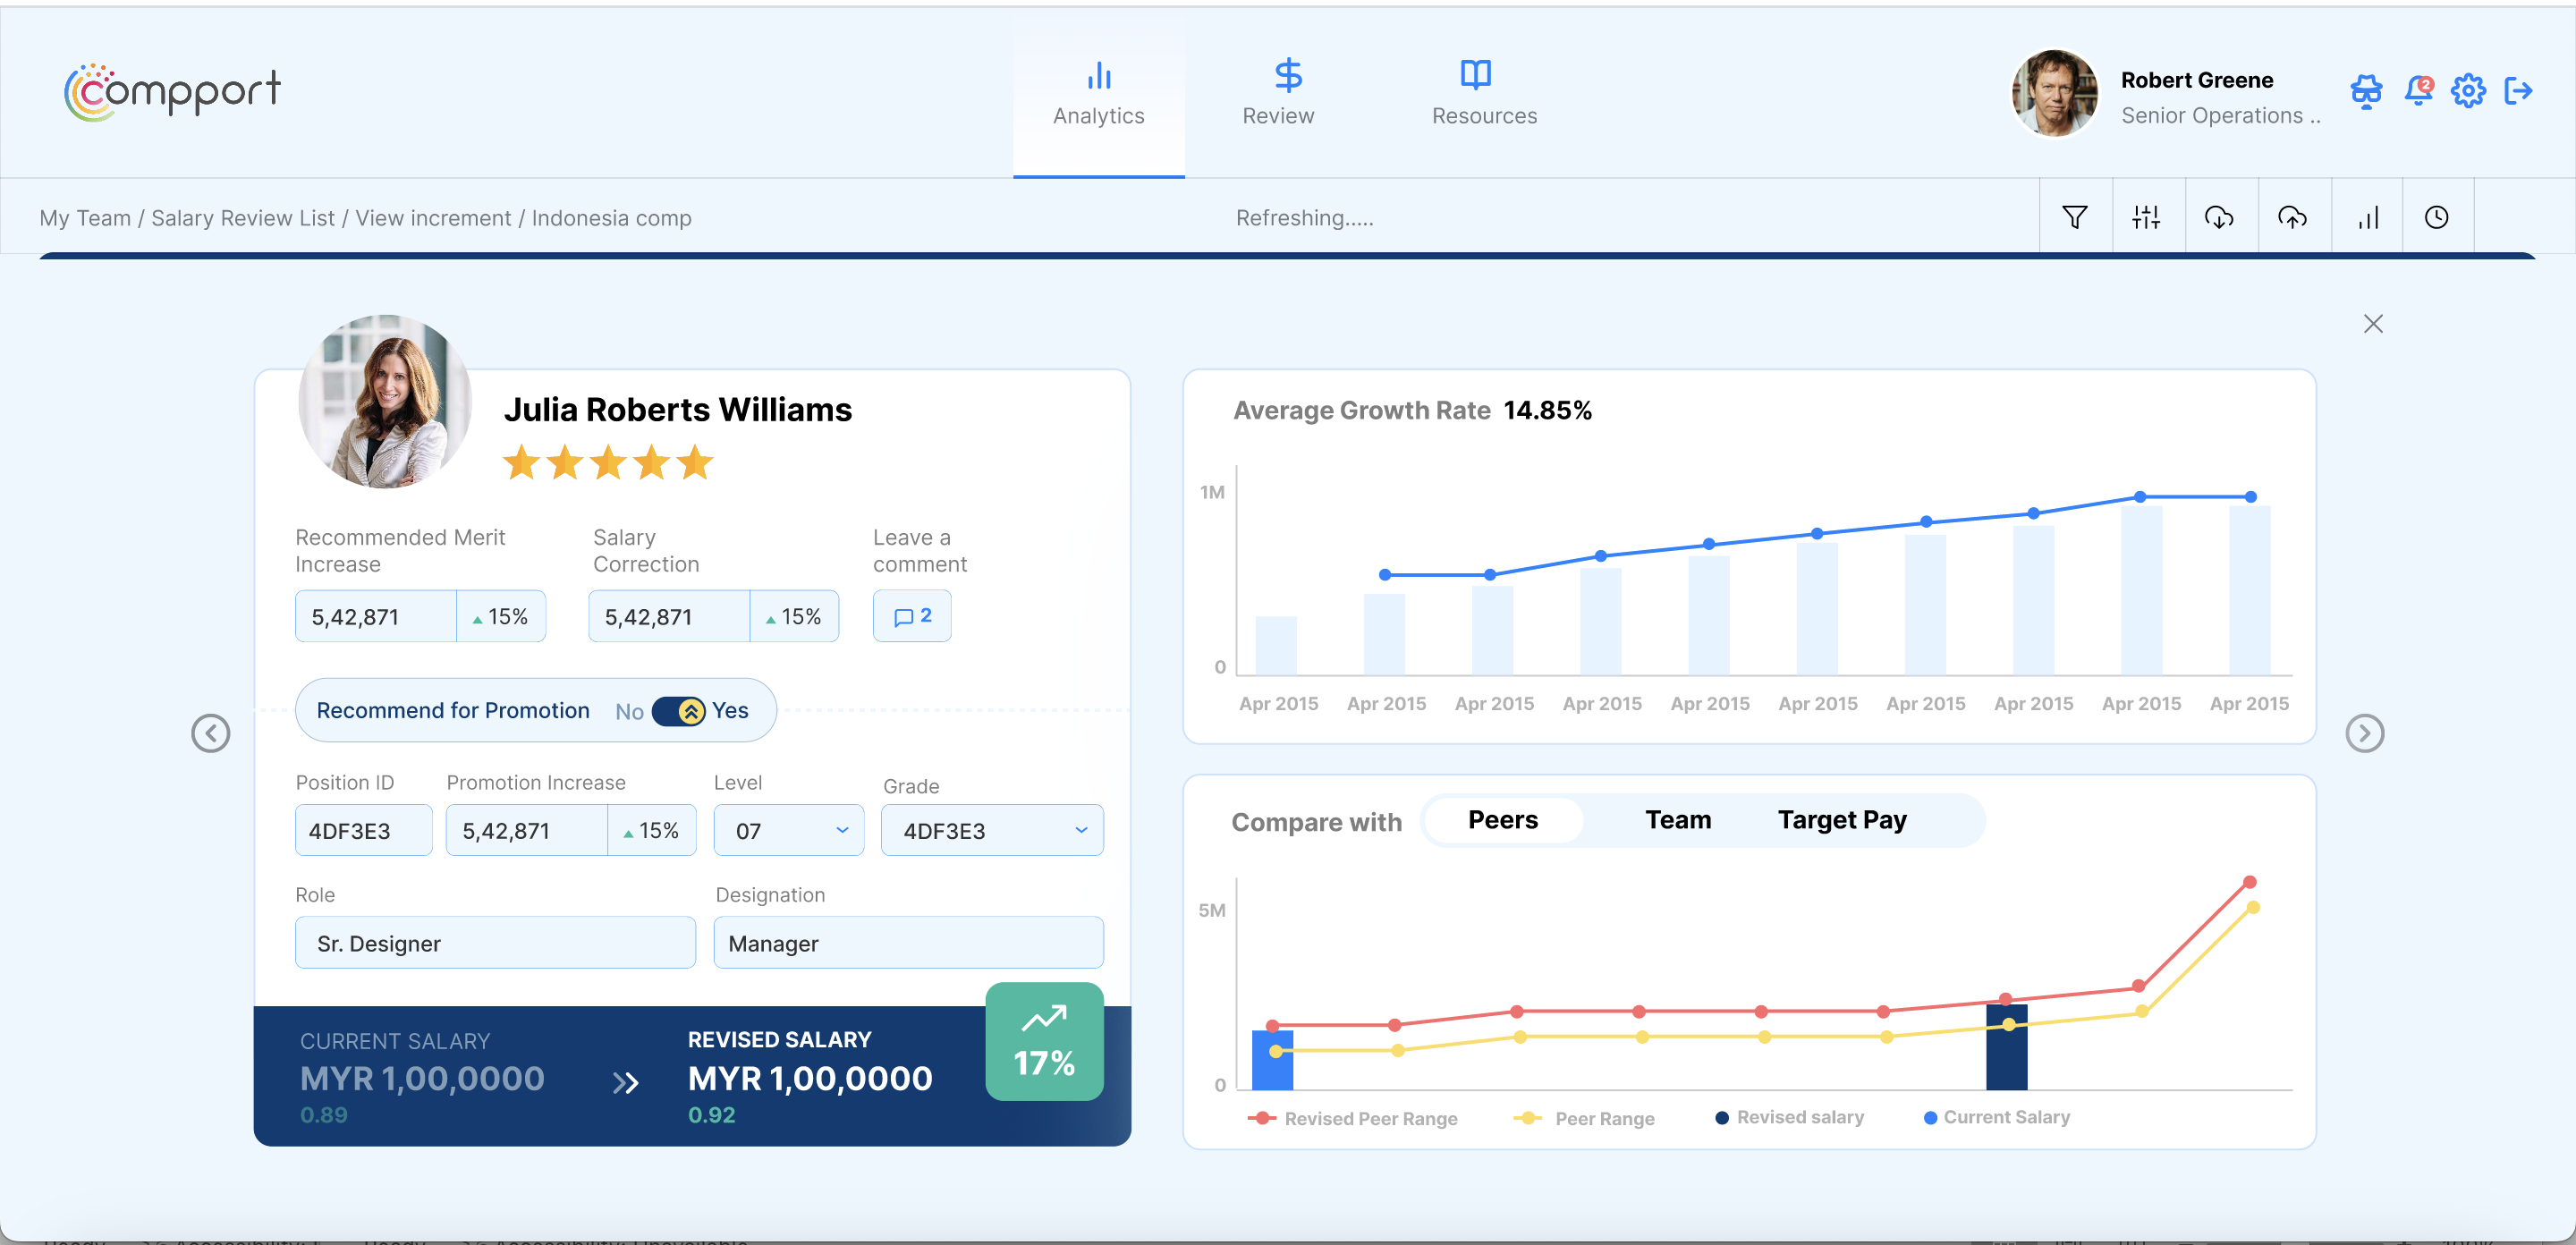 Compport offers employee profiles, increment history, and growth dashboards. Streamline performance reviews, track salary increments, and visualize growth at a glance. Drive transparency, fairness, and continuous development in just one platform